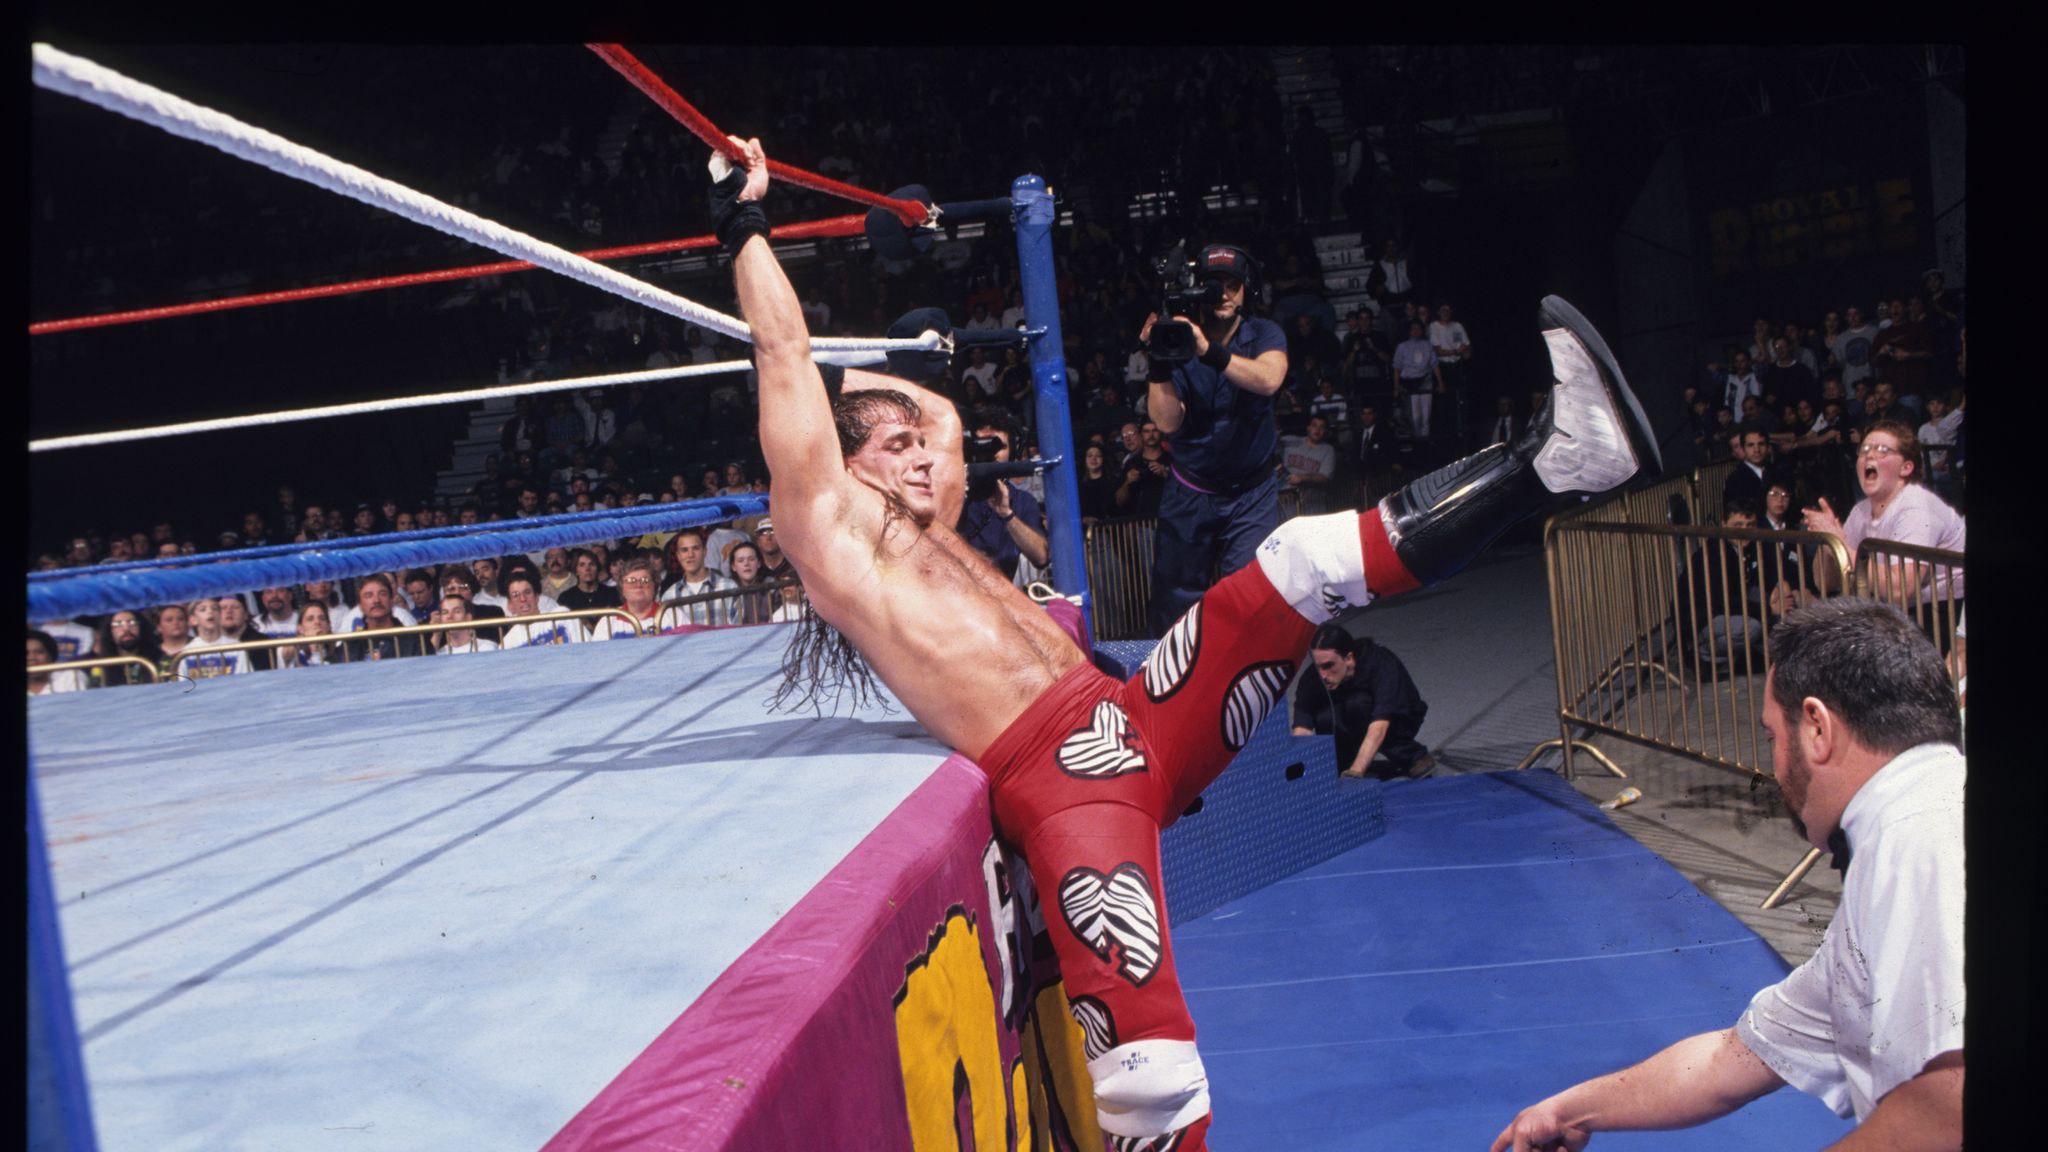 Shawn Michaels: Facts Only Hardcore Fans Know About The Heartbreak Kid